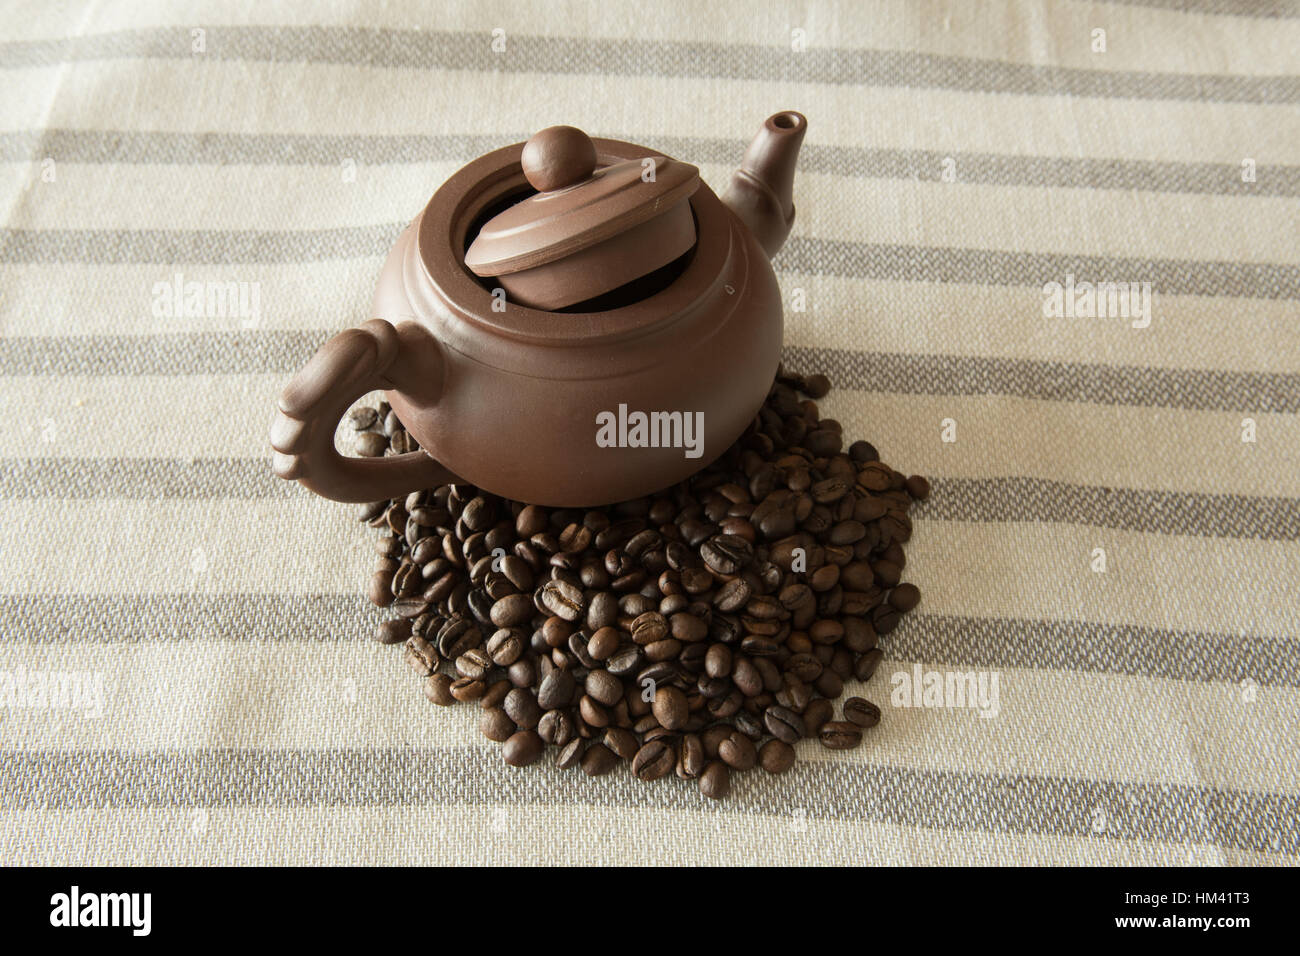 Coffee beans with pot Stock Photo